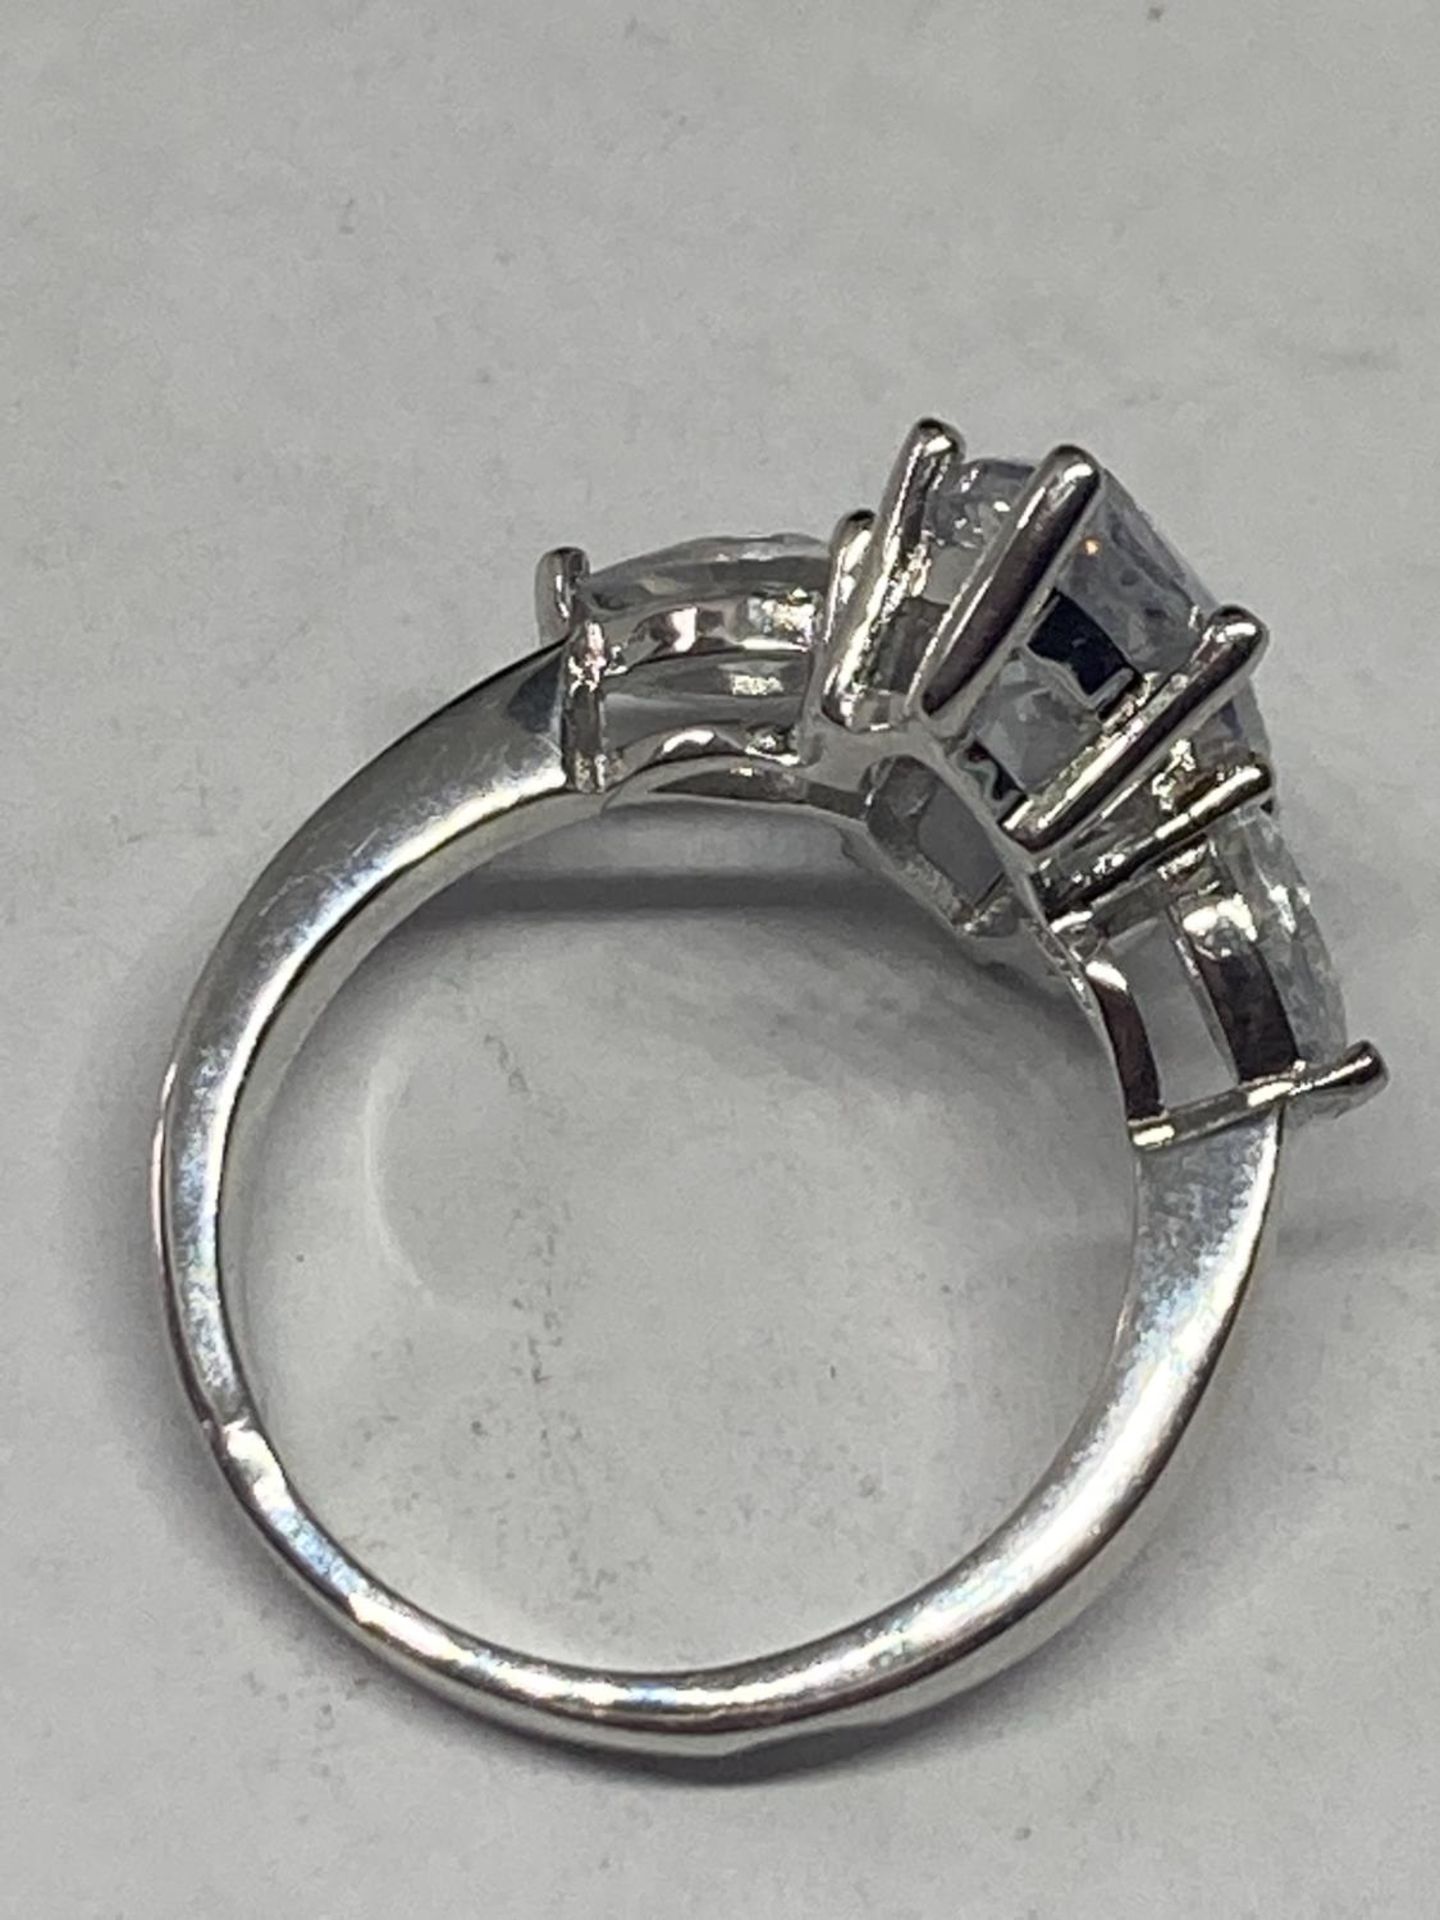 A MARKED 9K RING WITH 5 CARATS OF MOISSANITE SIZE L/M GROSS WEIGHT 4.85 GRAMS - Image 3 of 3